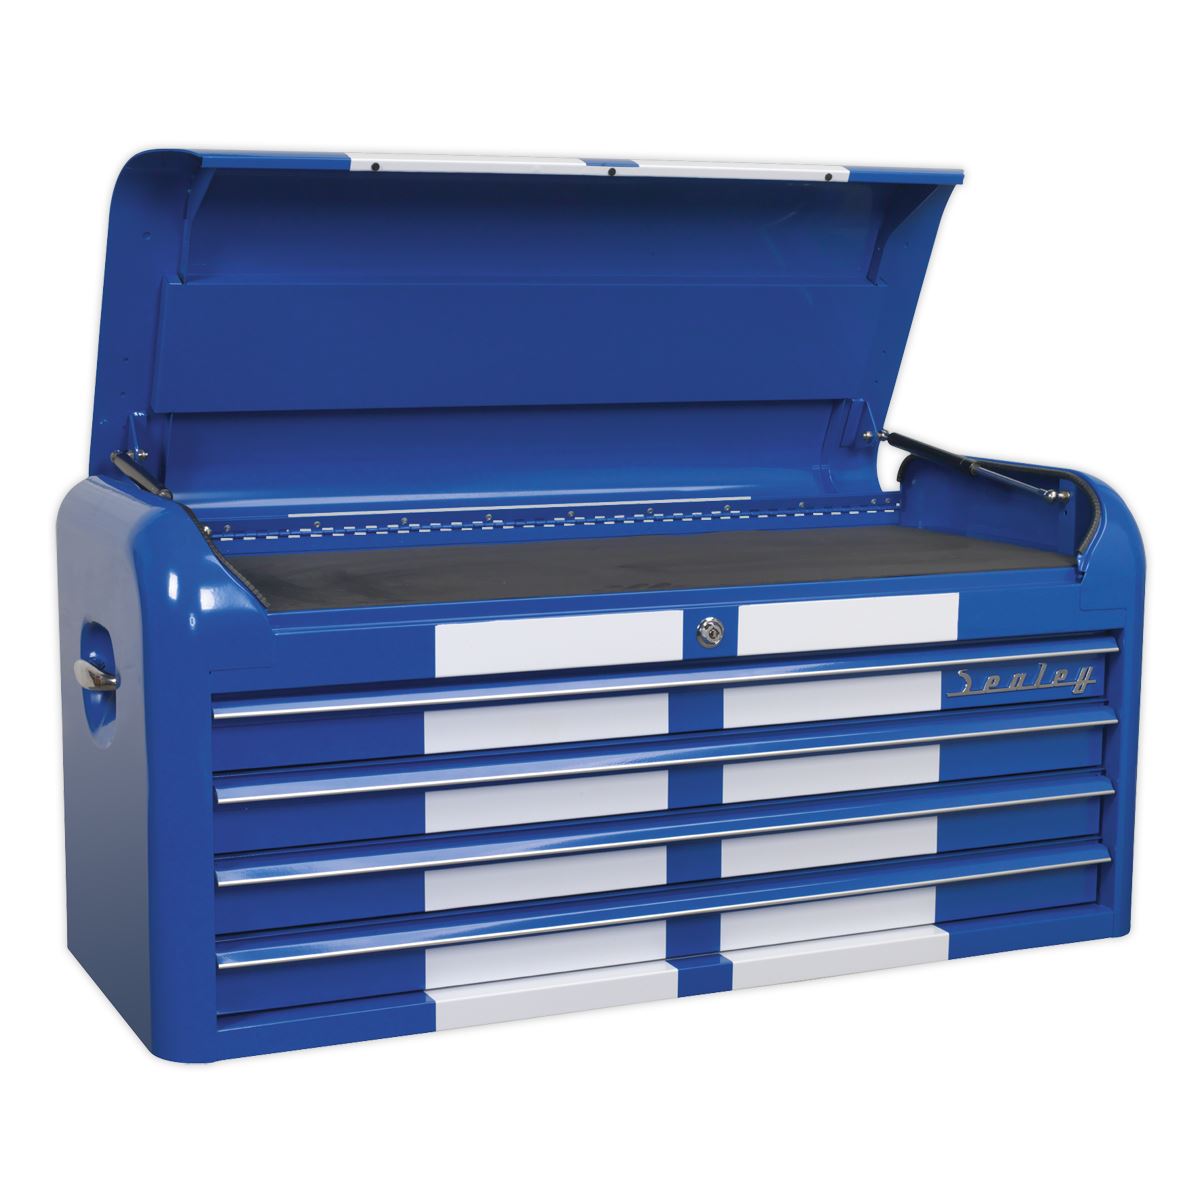 Sealey Premier Topchest 4 Drawer Wide Retro Style - Blue with White Stripes